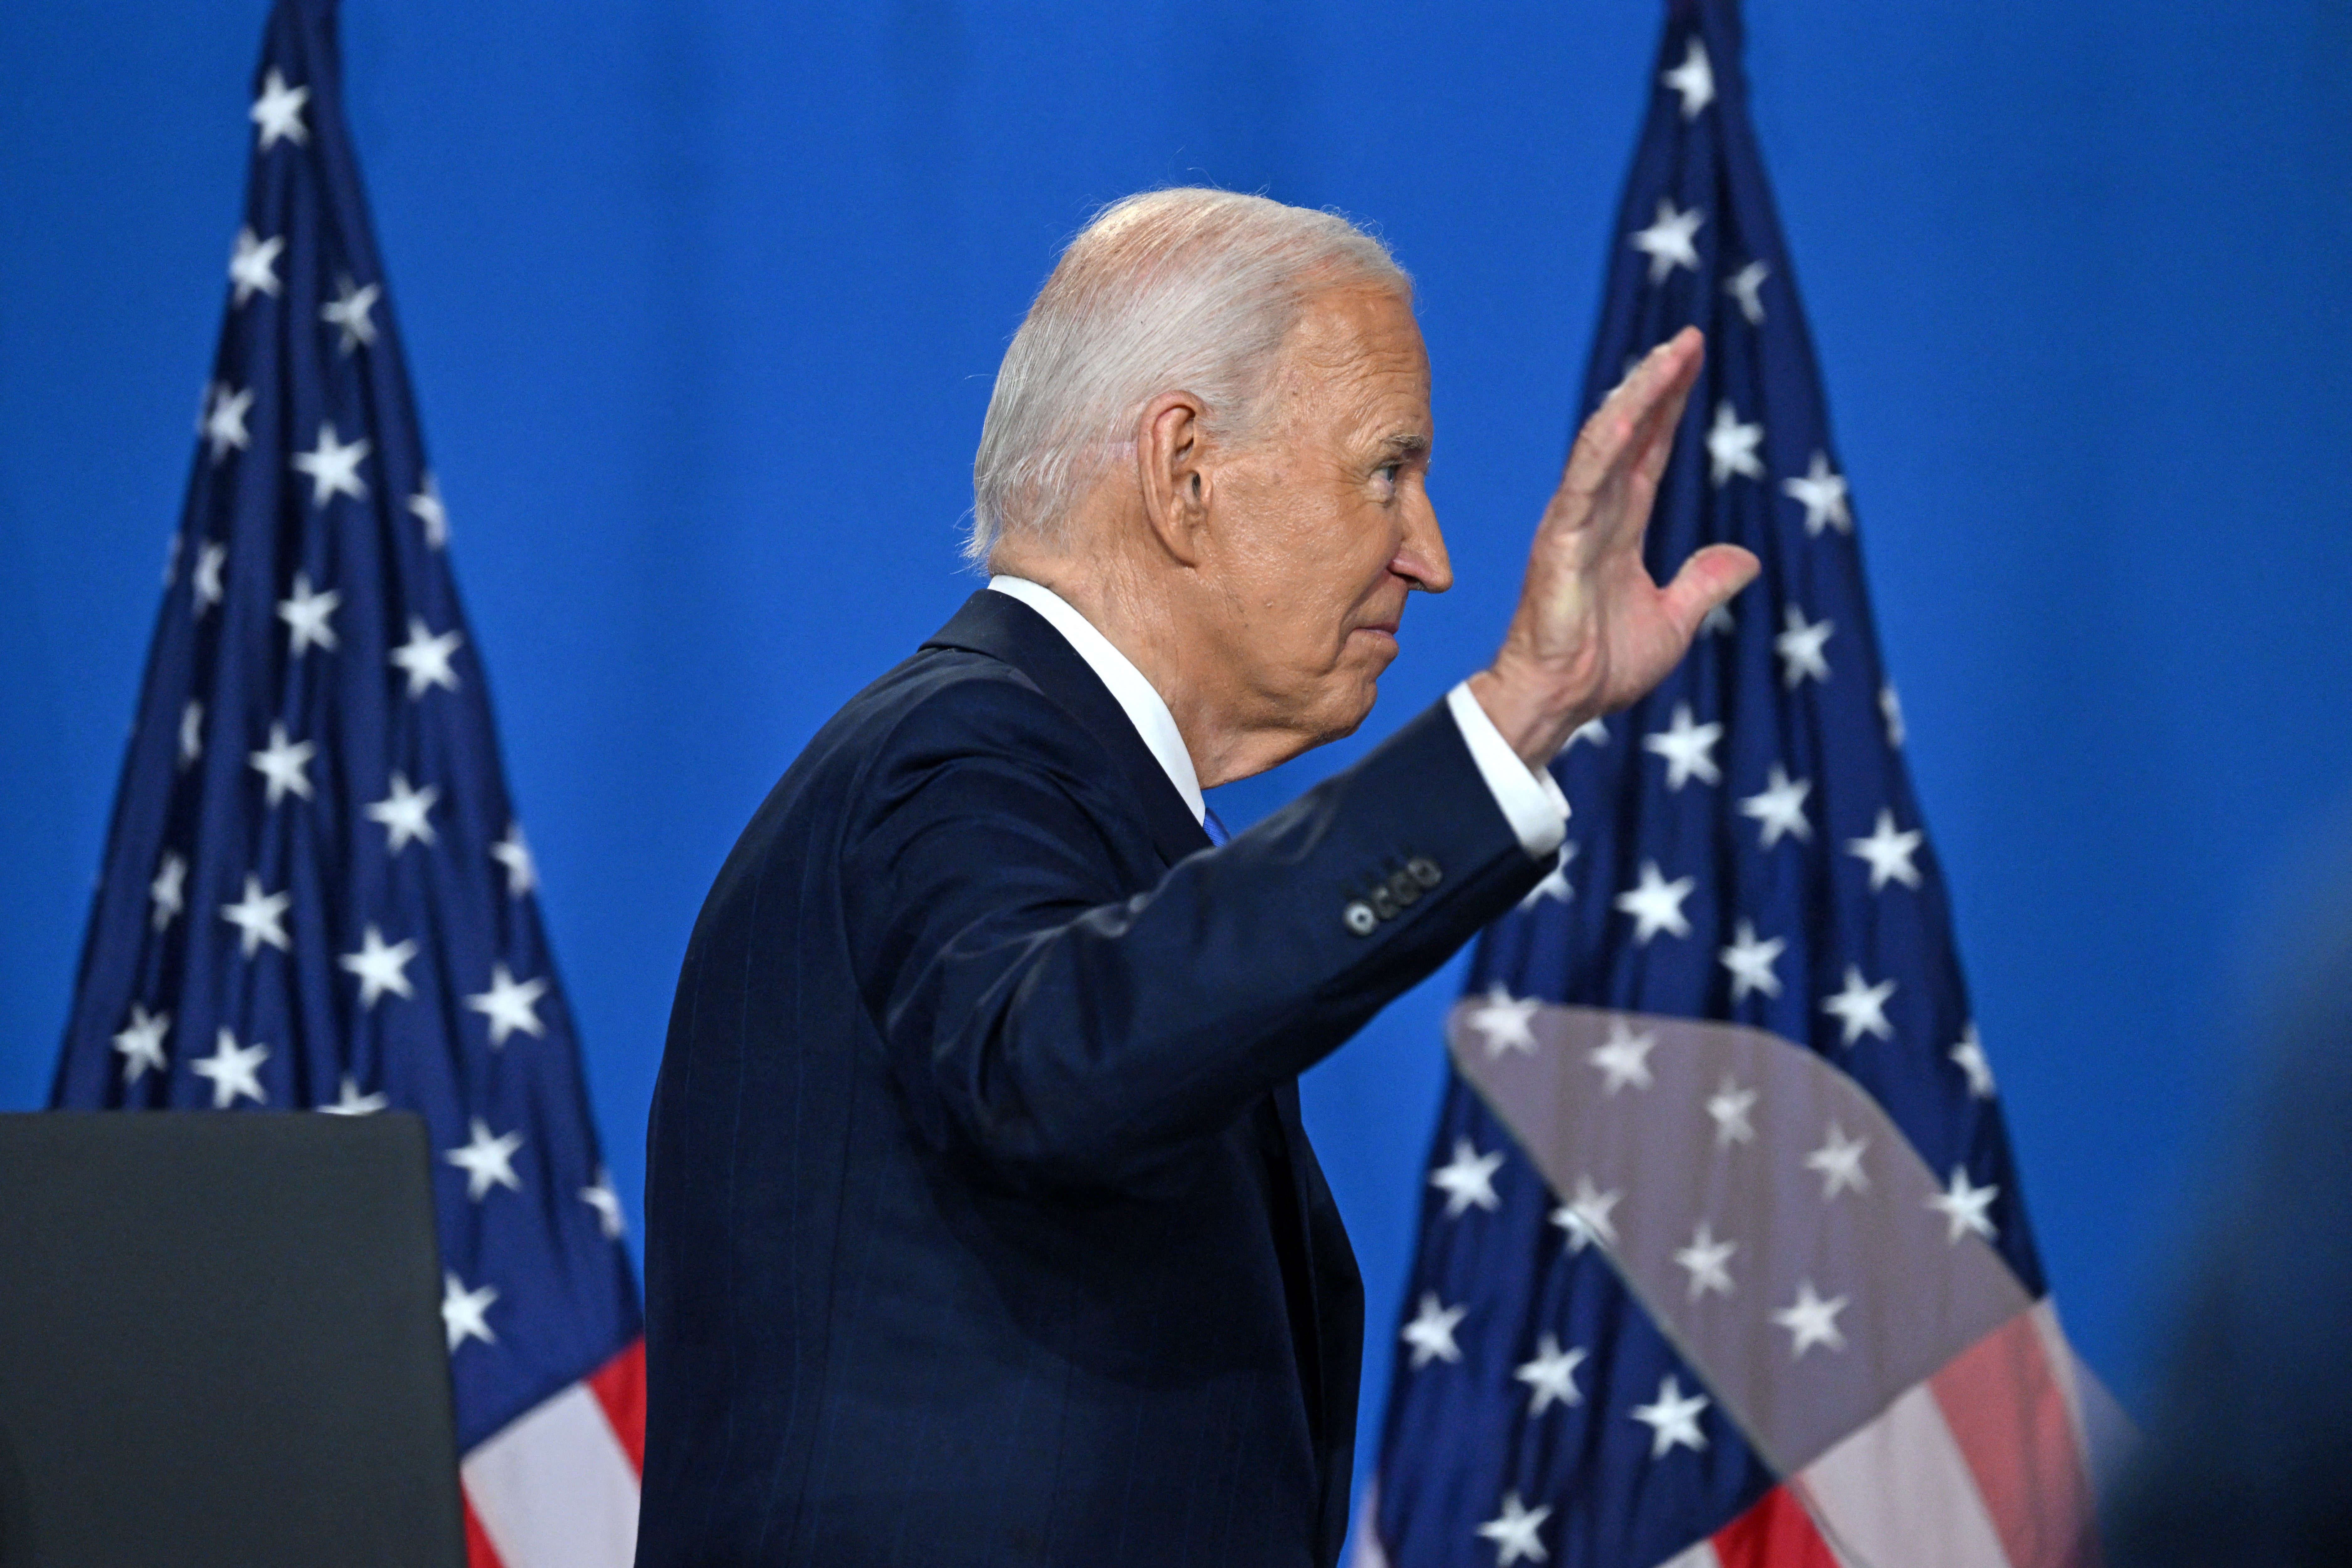 Joe Biden waves as he leaves after speaking during a press conference at the close of the 75th NATO Summit on July 11. Major donors are holding back as long as he remains on the ticket